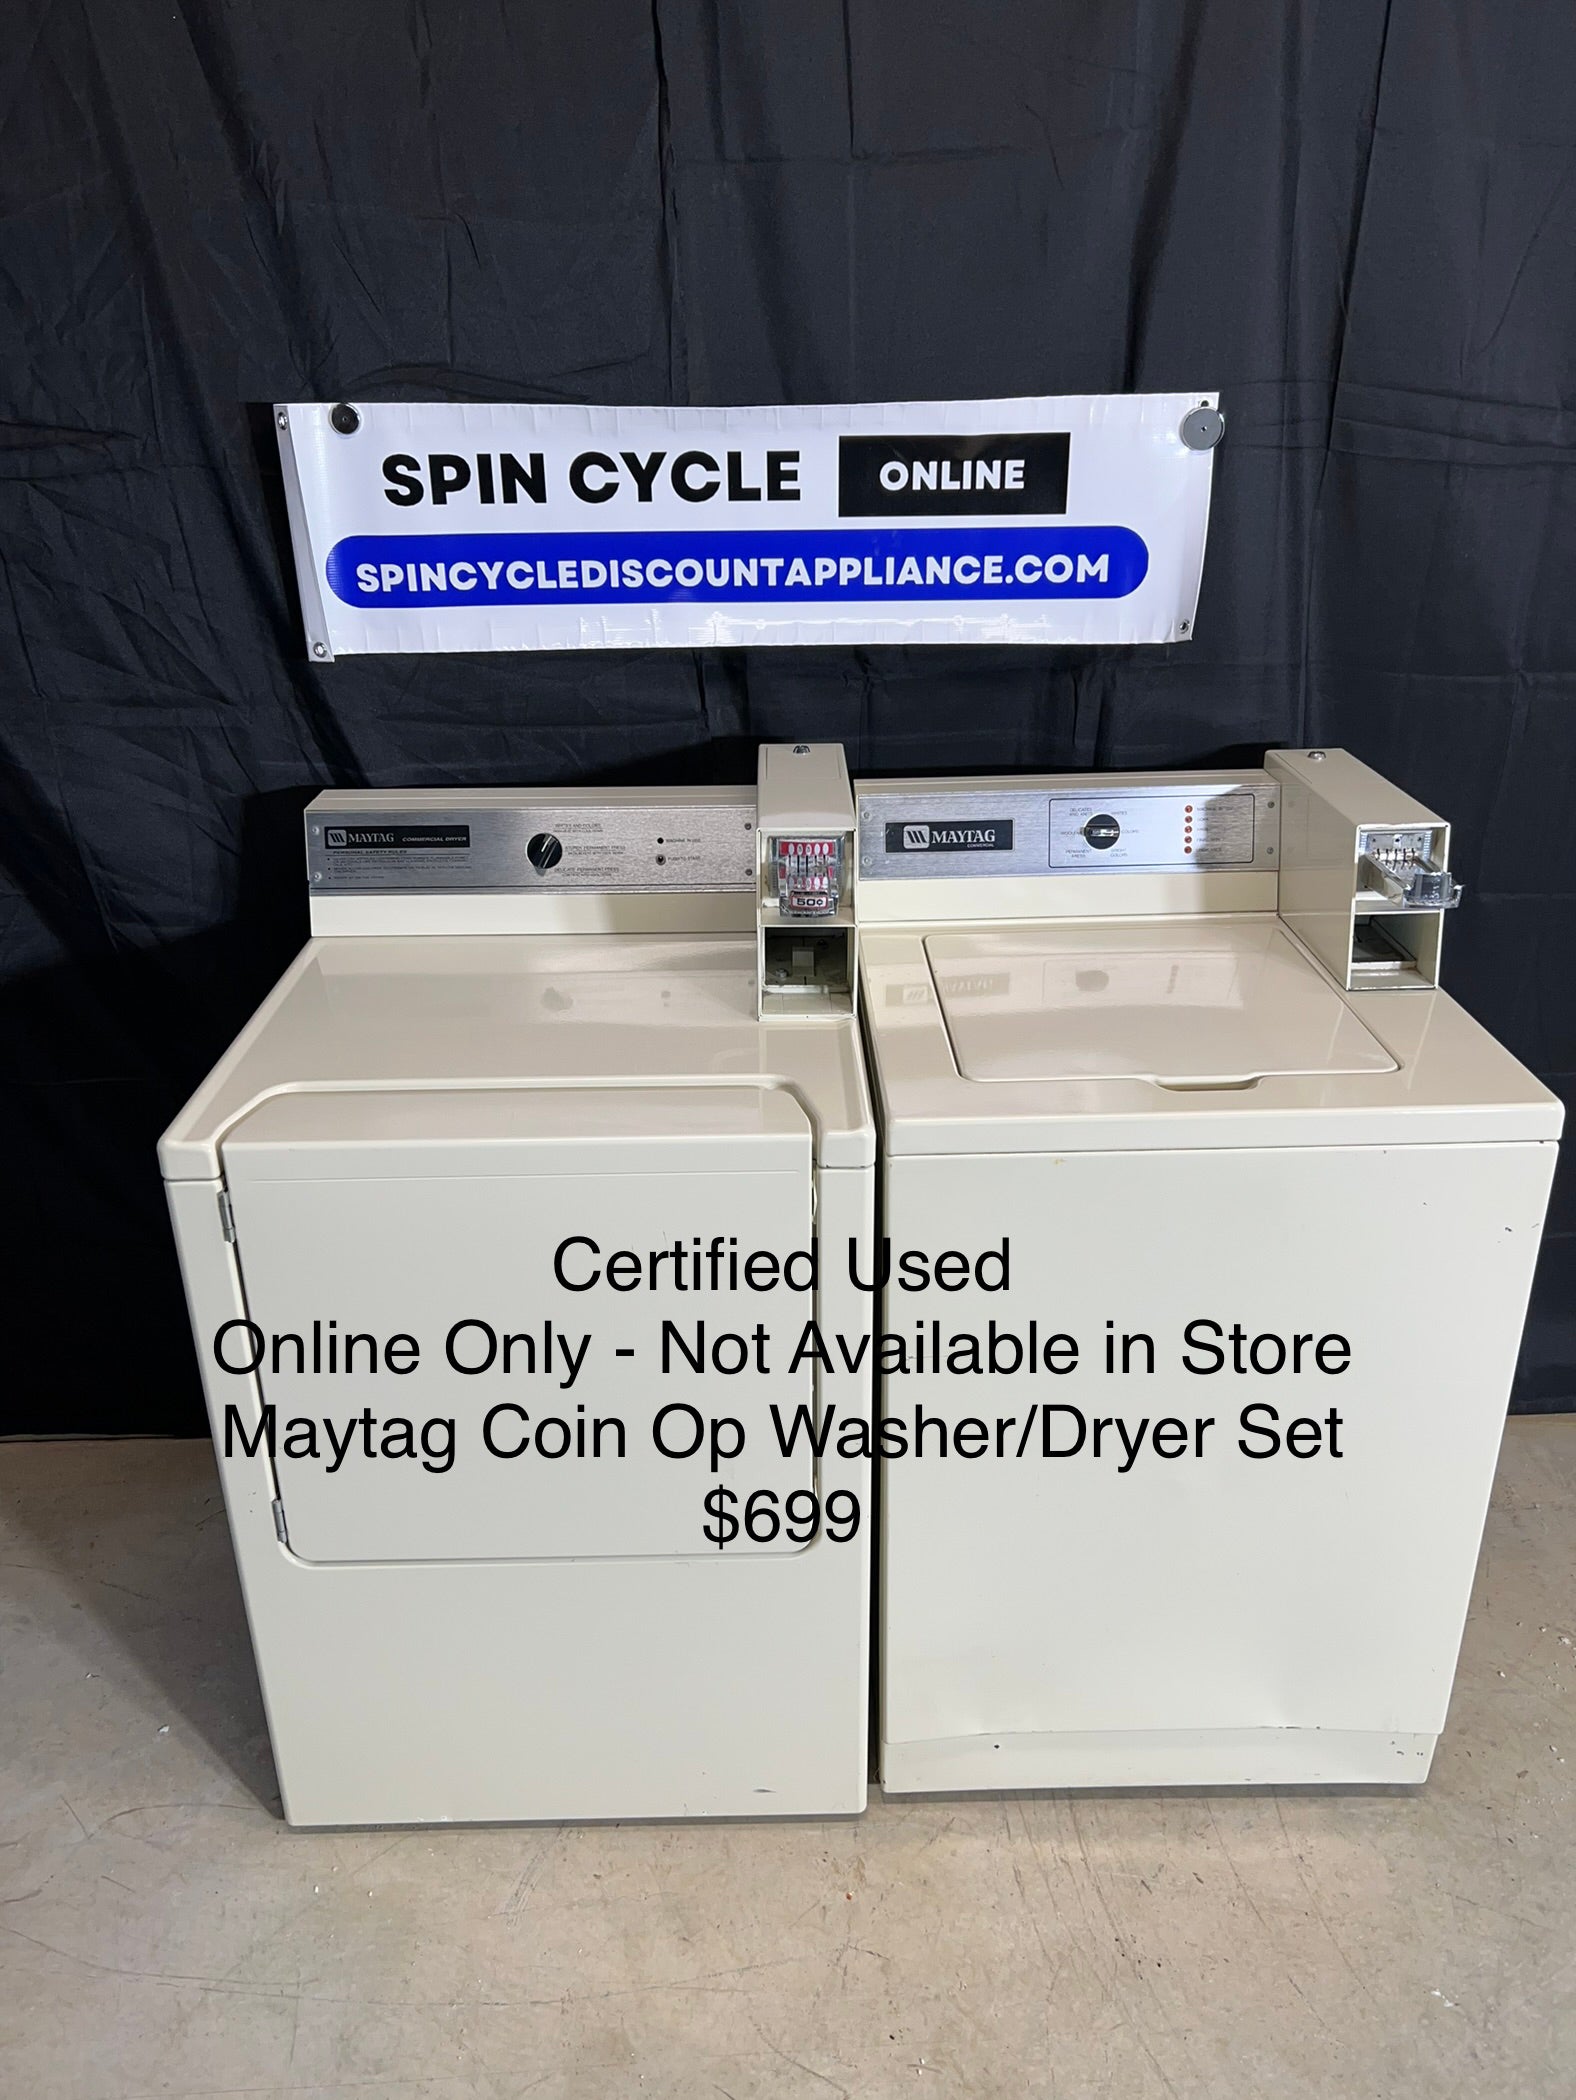 Certified Used Maytag Coin Operated Washer/Dryer Spin Cycle Discount Appliance LLC